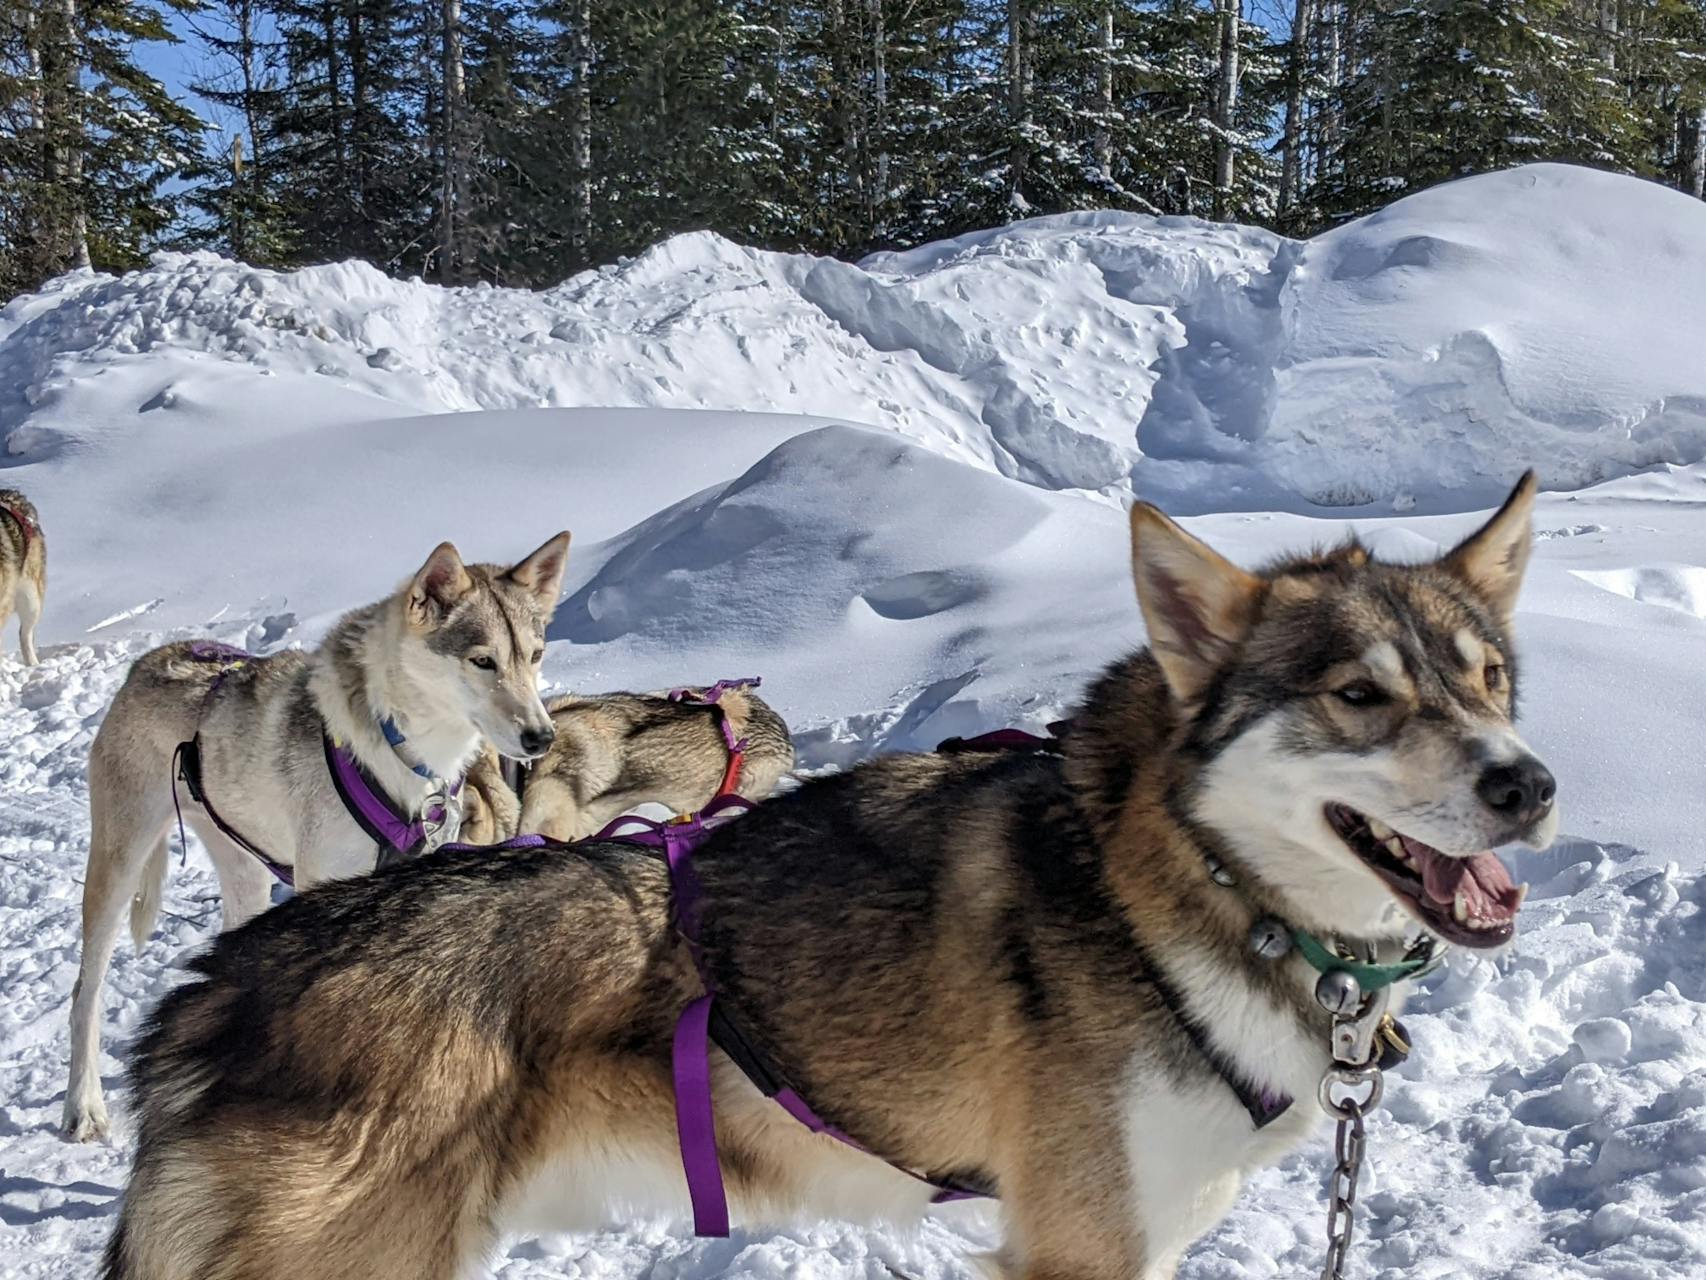 Dog sledding offers kids a unique wintertime thrill.